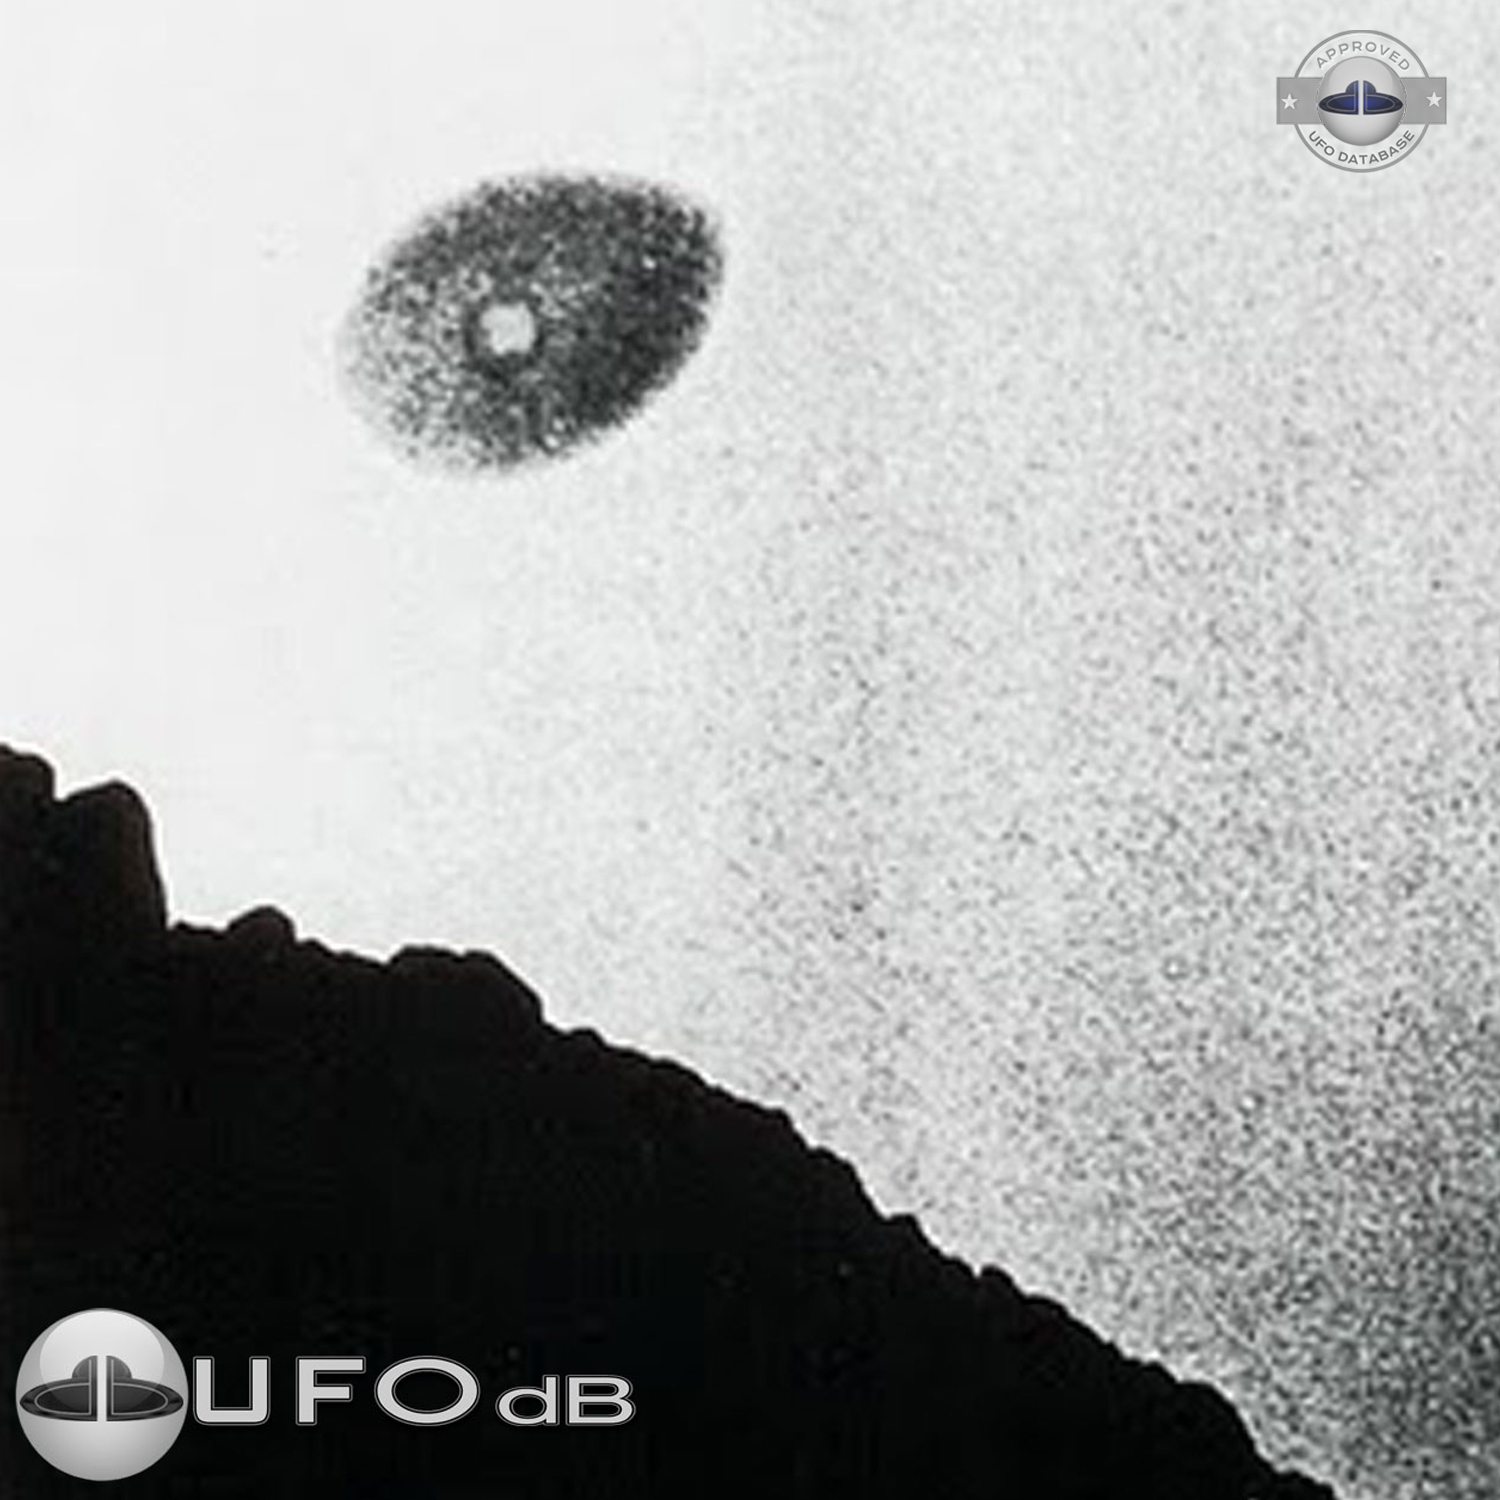 UFO was photograph in the early lights of dawn on May 17 1958 USA UFO Picture #127-2